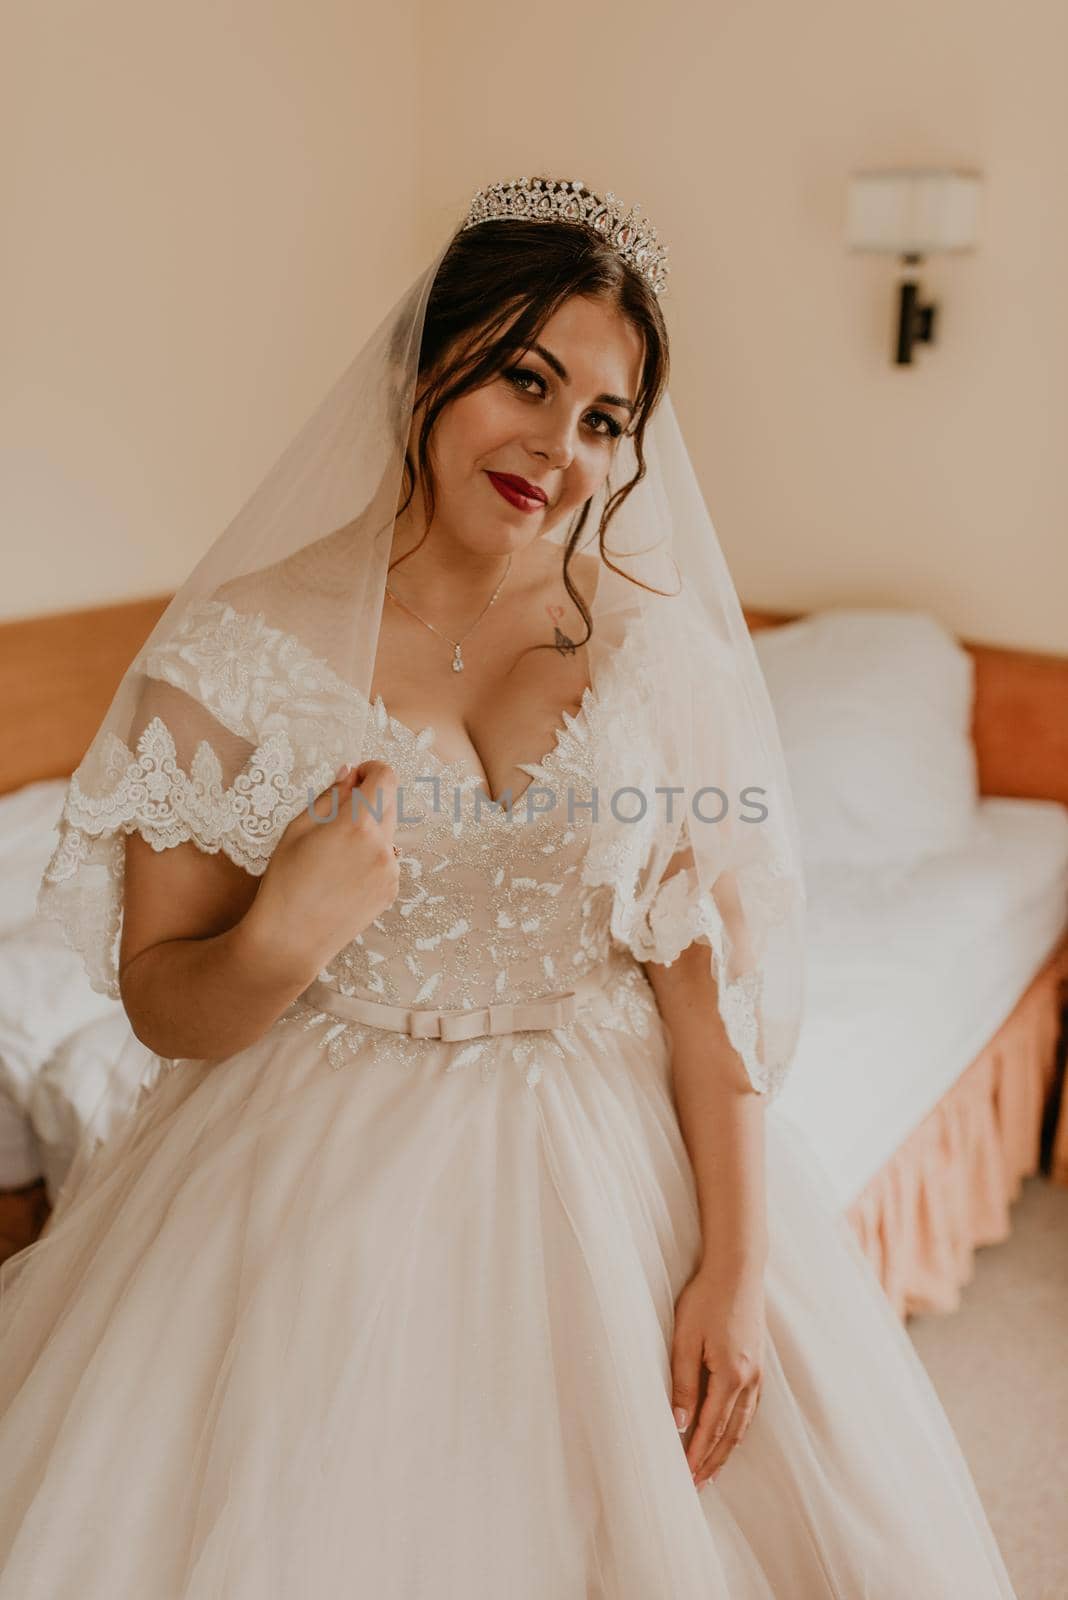 European Caucasian young black-haired woman bride in white wedding dress with long veil and tiara on head. girl bedroom in beige colors morning gatherings of preparing bride for holiday party wedding